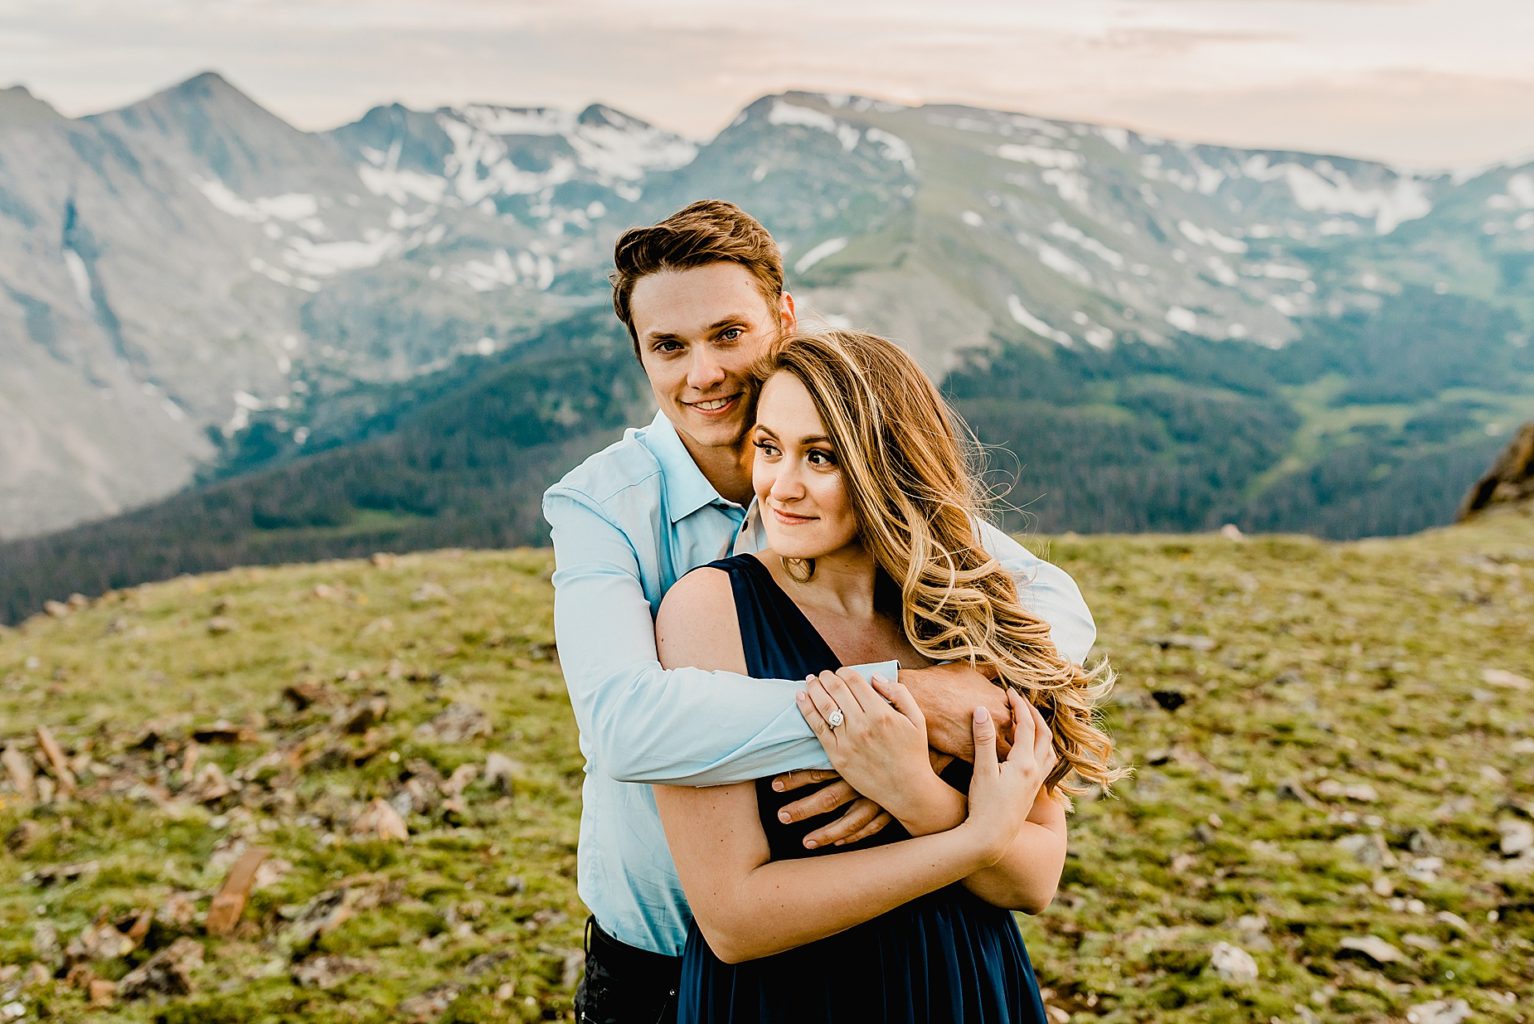 man gives woman a hug and kiss with majestic rocky mountain and green grass scenery in the background